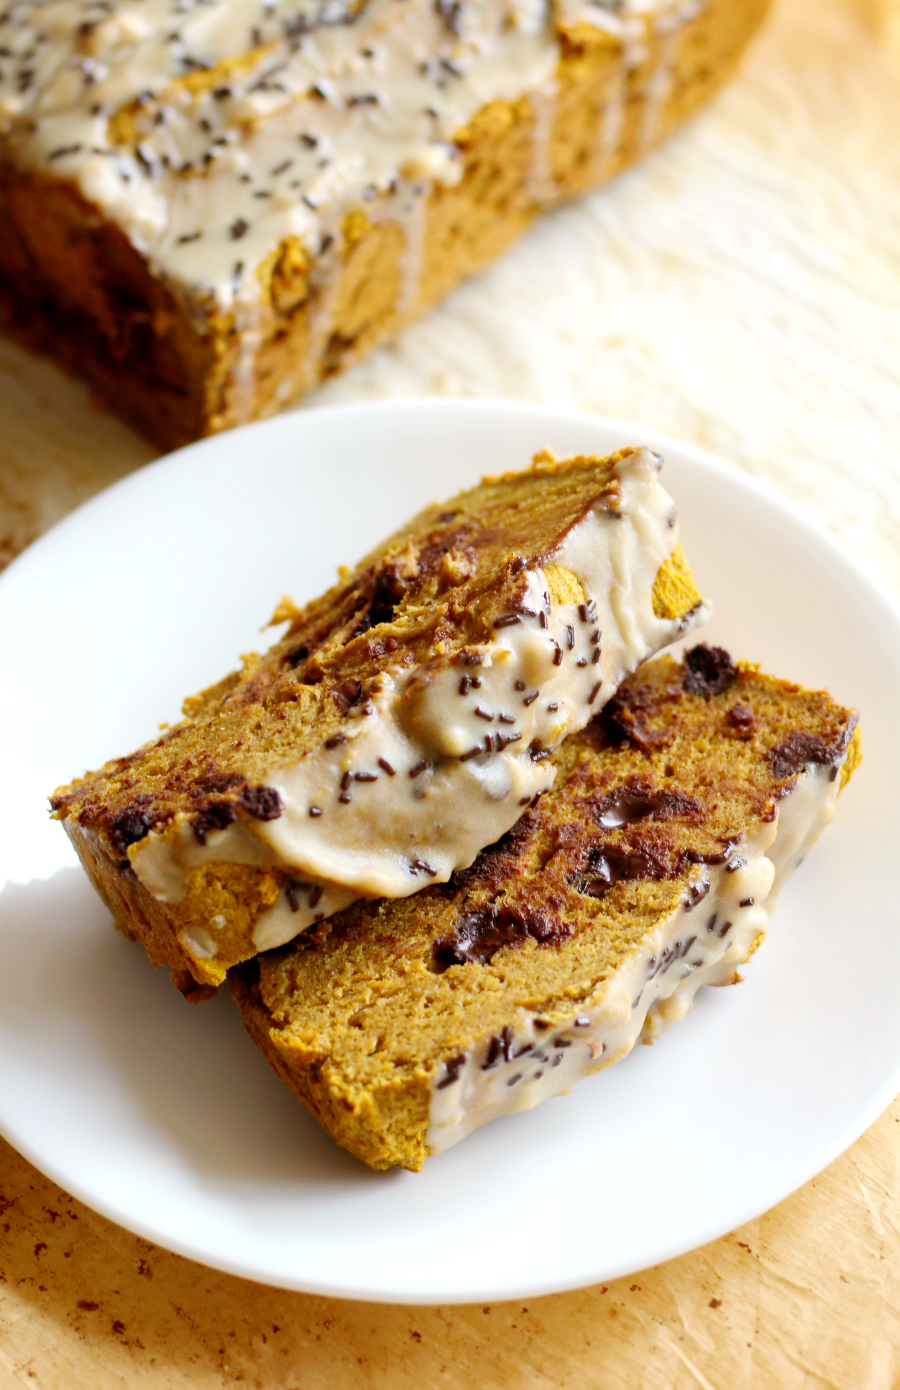 Tahini Chocolate Chip Pumpkin Bread | Strength and Sunshine @RebeccaGF666 A seasonal Fall classic with some mouthwatering additions! This Tahini Chocolate Chip Pumpkin Bread recipe will have you ready for autumn in a snap! Gluten-free, nut-free, and vegan, this quick bread recipe is not your average baked good! Perfect for breakfast, snacking, or dessert!